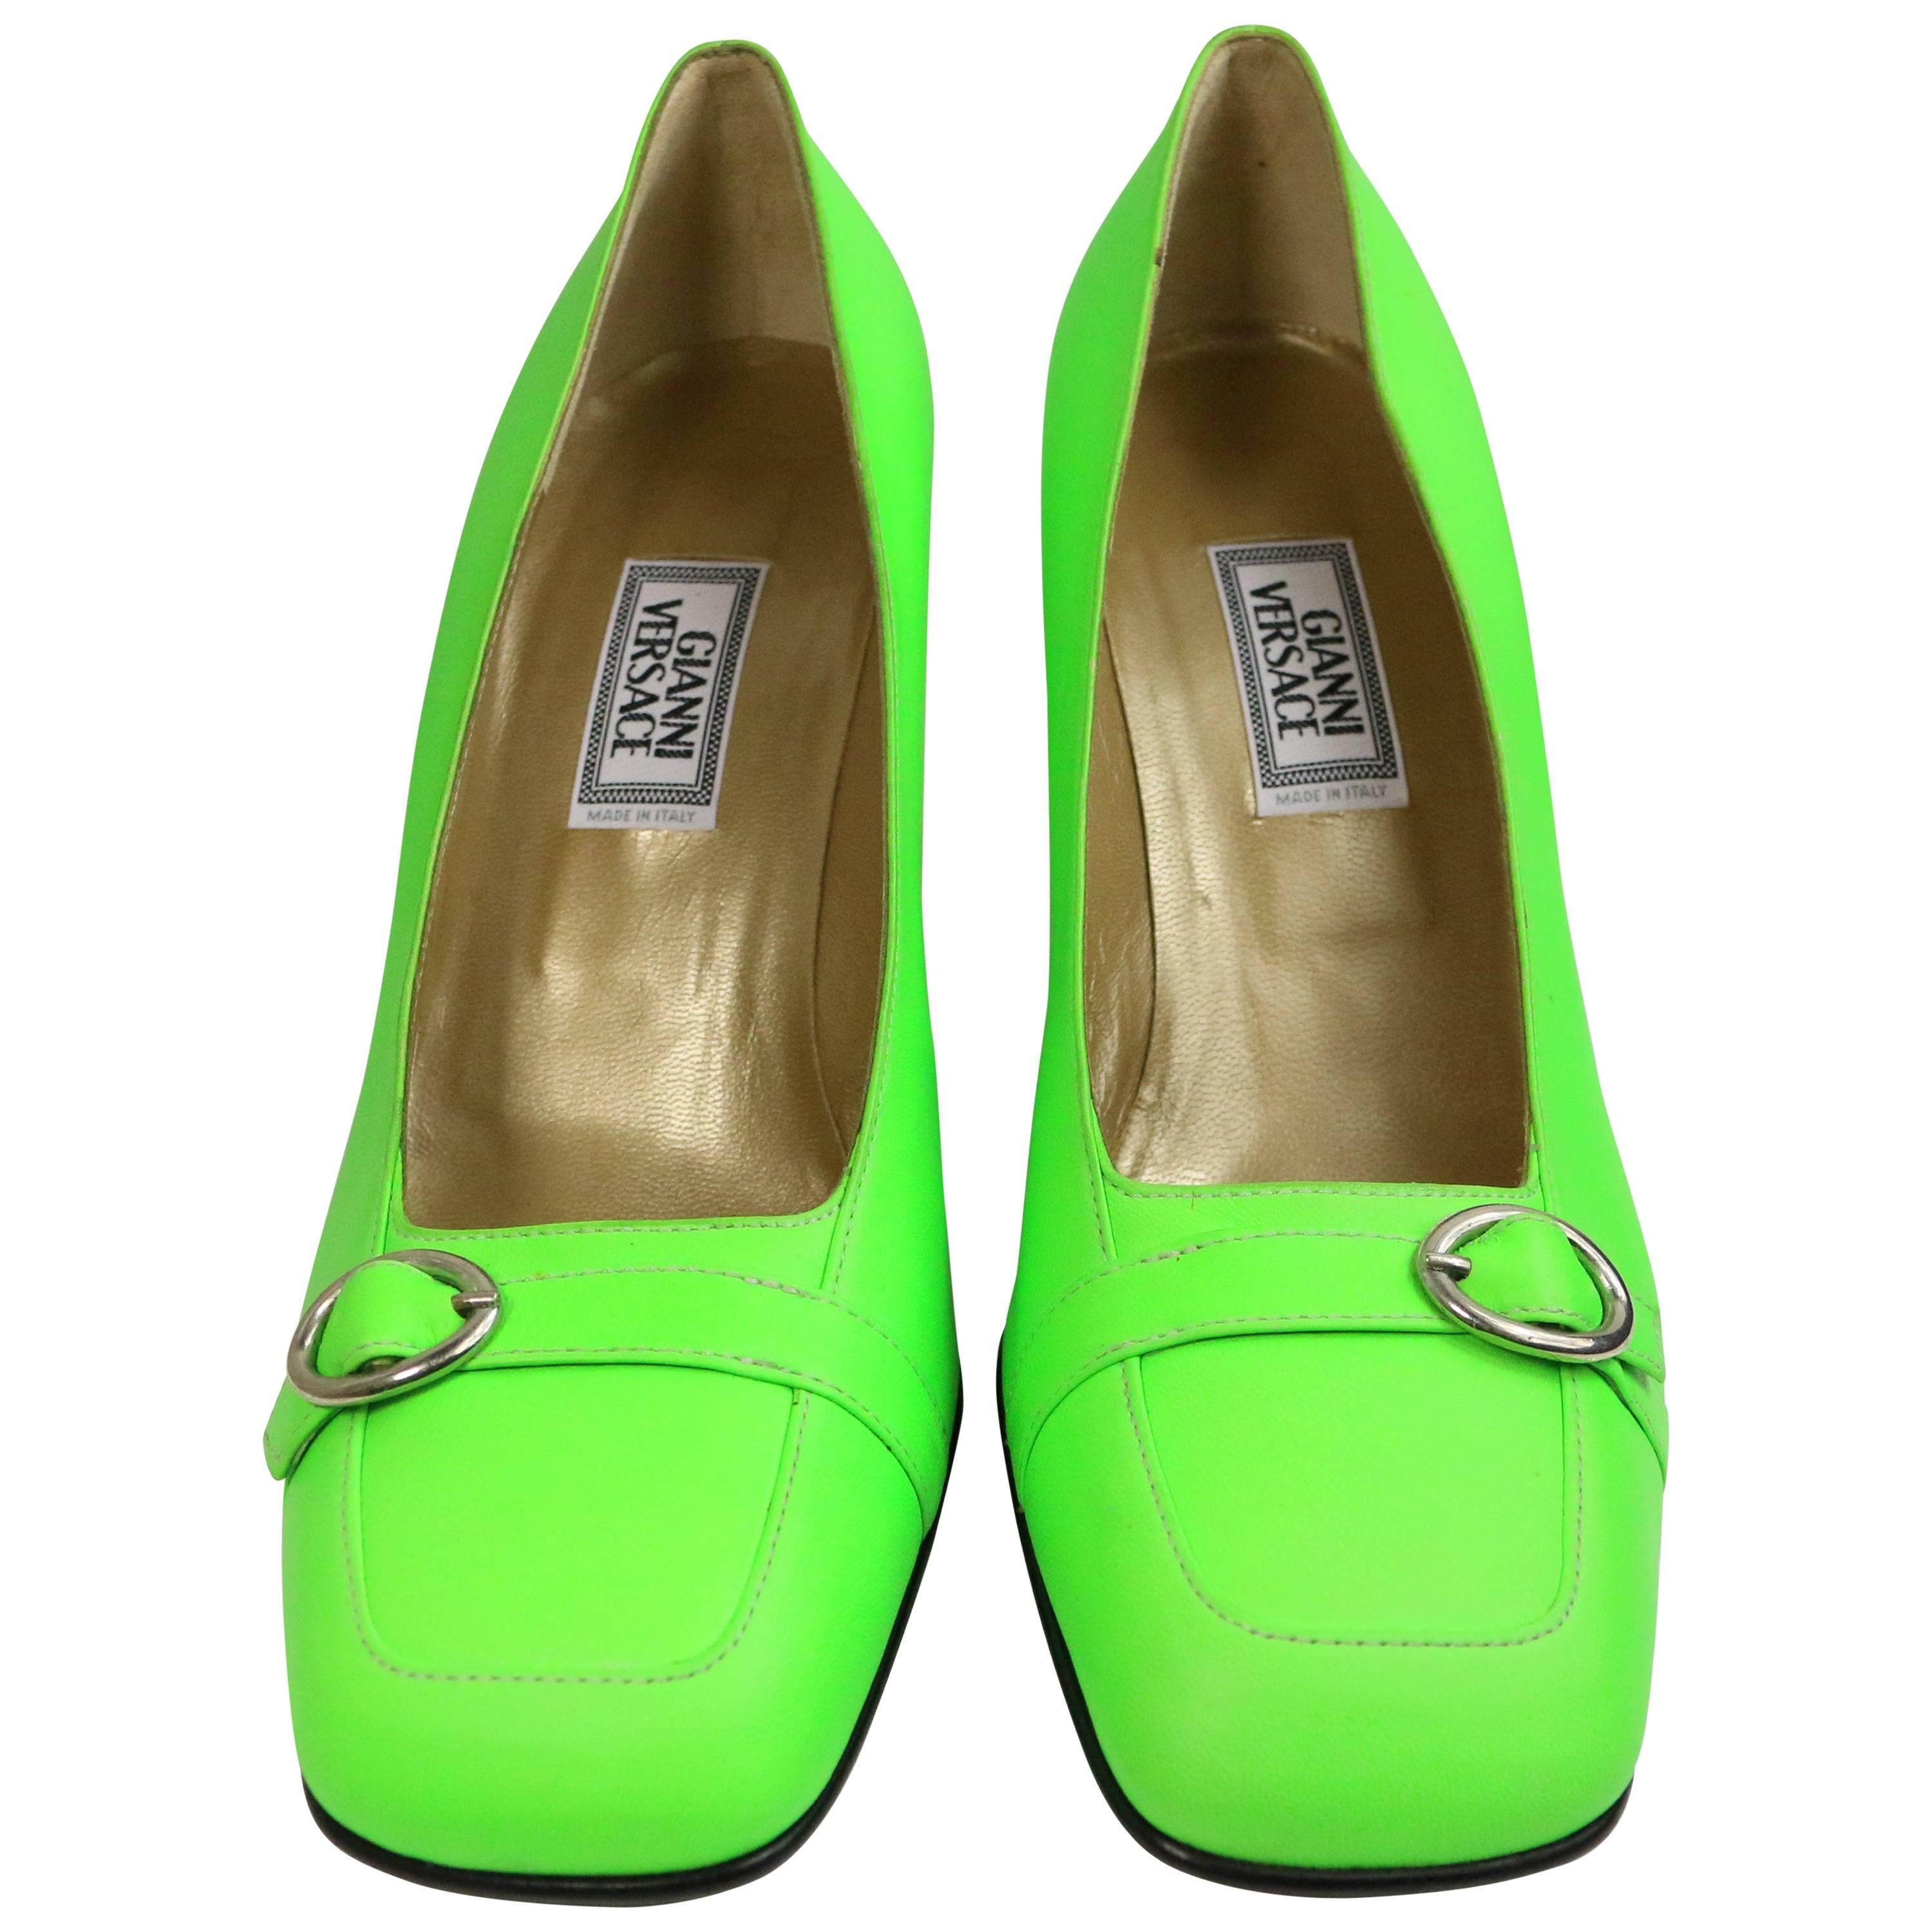 Gianni Versace Neon Green Leather Square Toe Heels